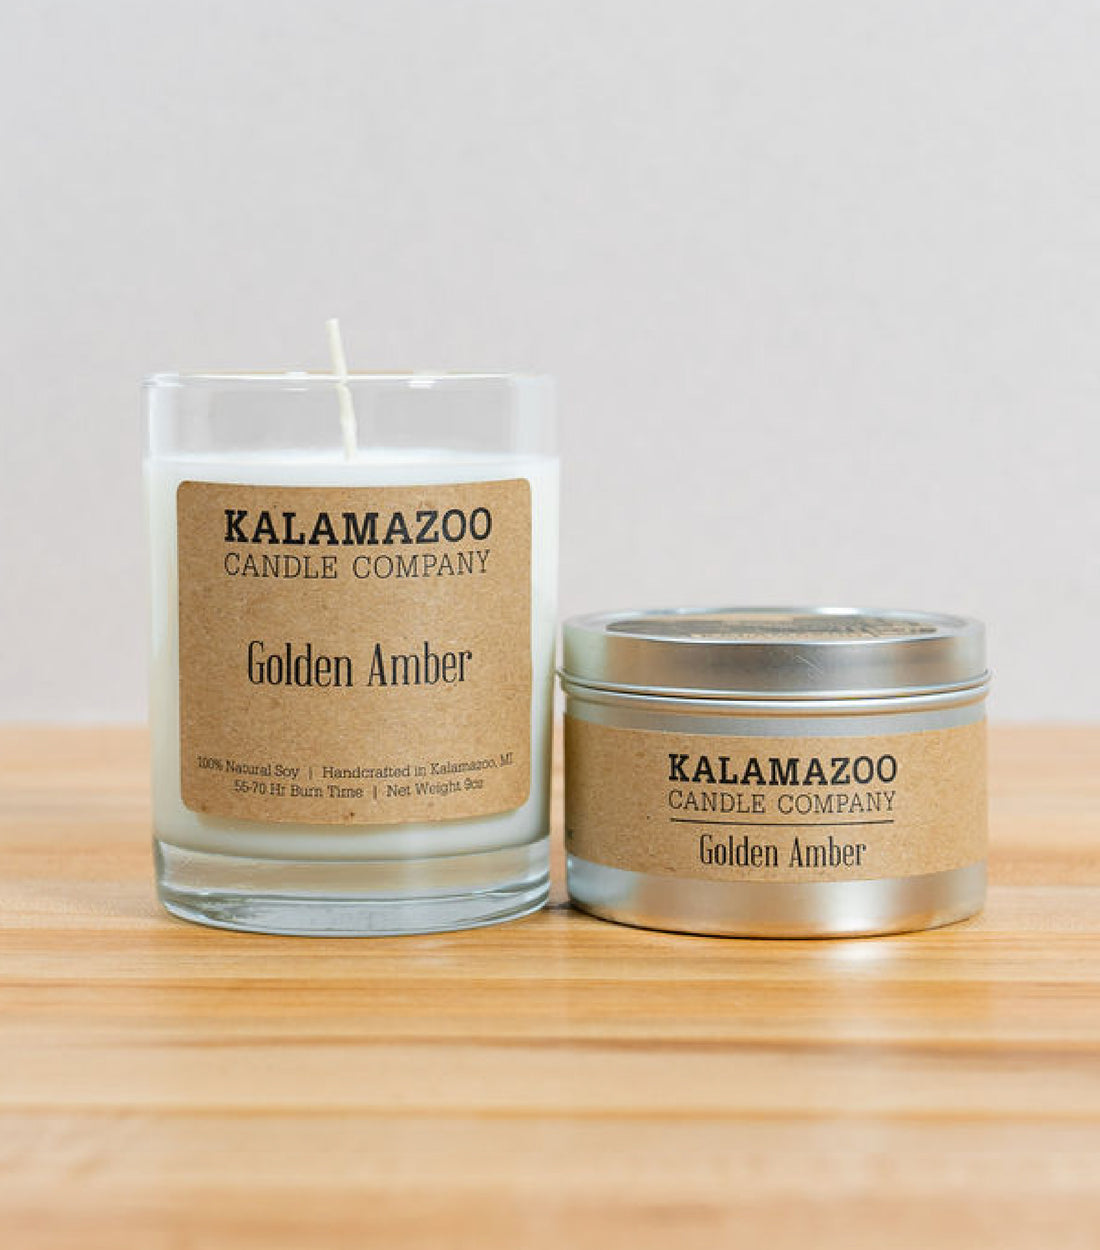 Golden Amber Candles Warm, rich, and welcoming, ancient resins and exotic woods are brightened by golden citrus in this soy candle with notes of amber, vanilla, and orange zest. All Kalamazoo Candles are: 100% natural scented soy wax; produced using locally sourced ingredients